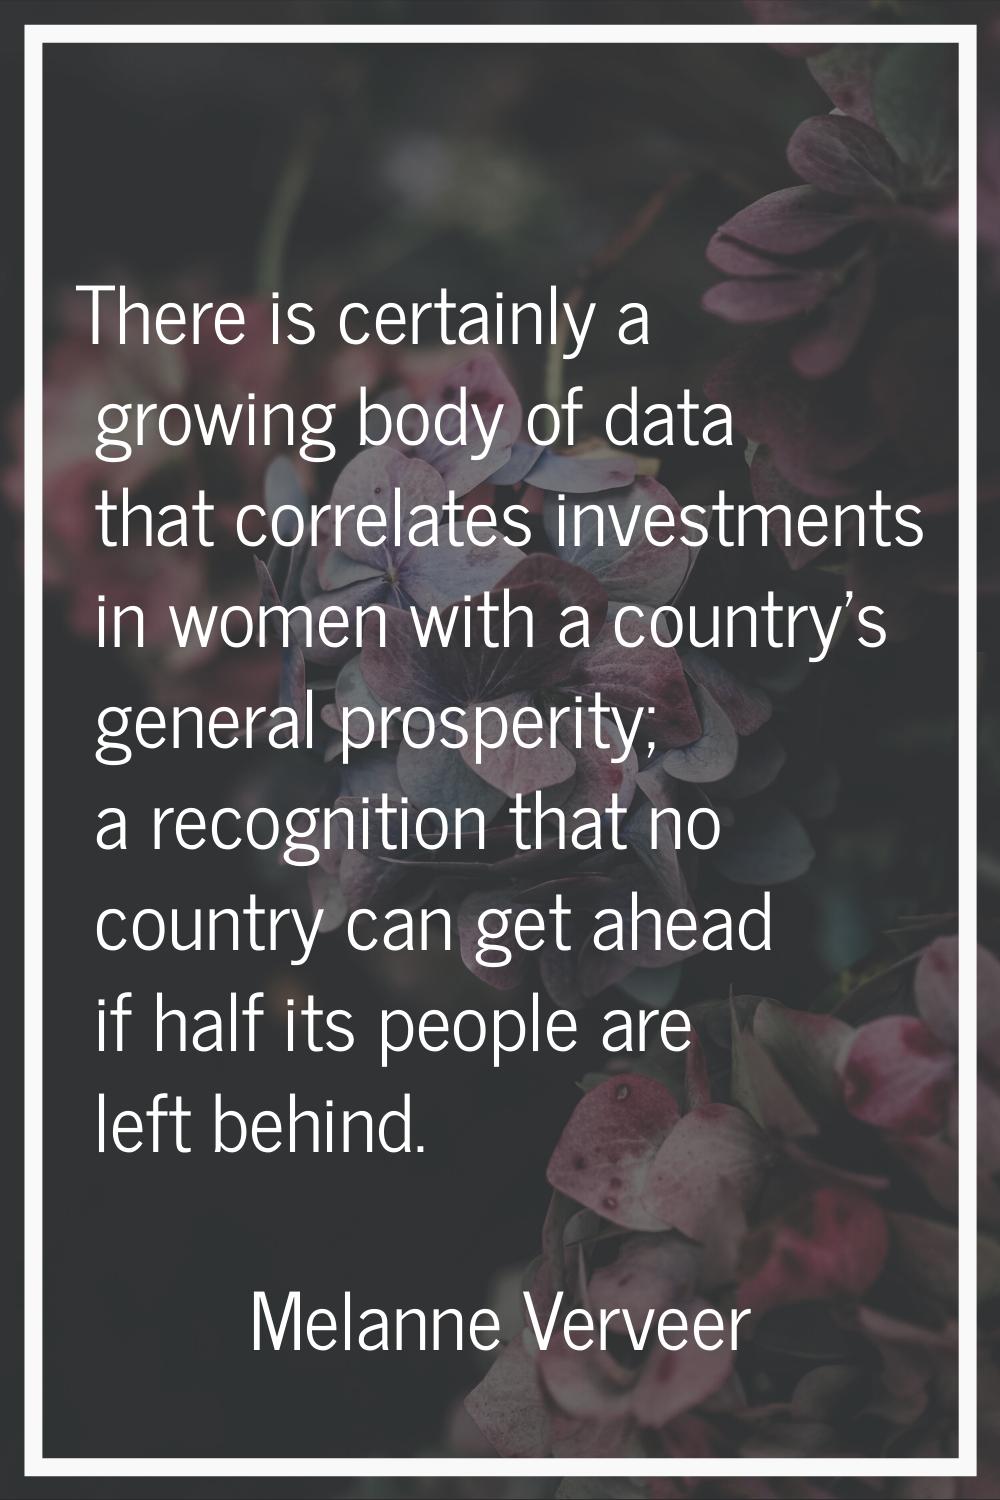 There is certainly a growing body of data that correlates investments in women with a country's gen